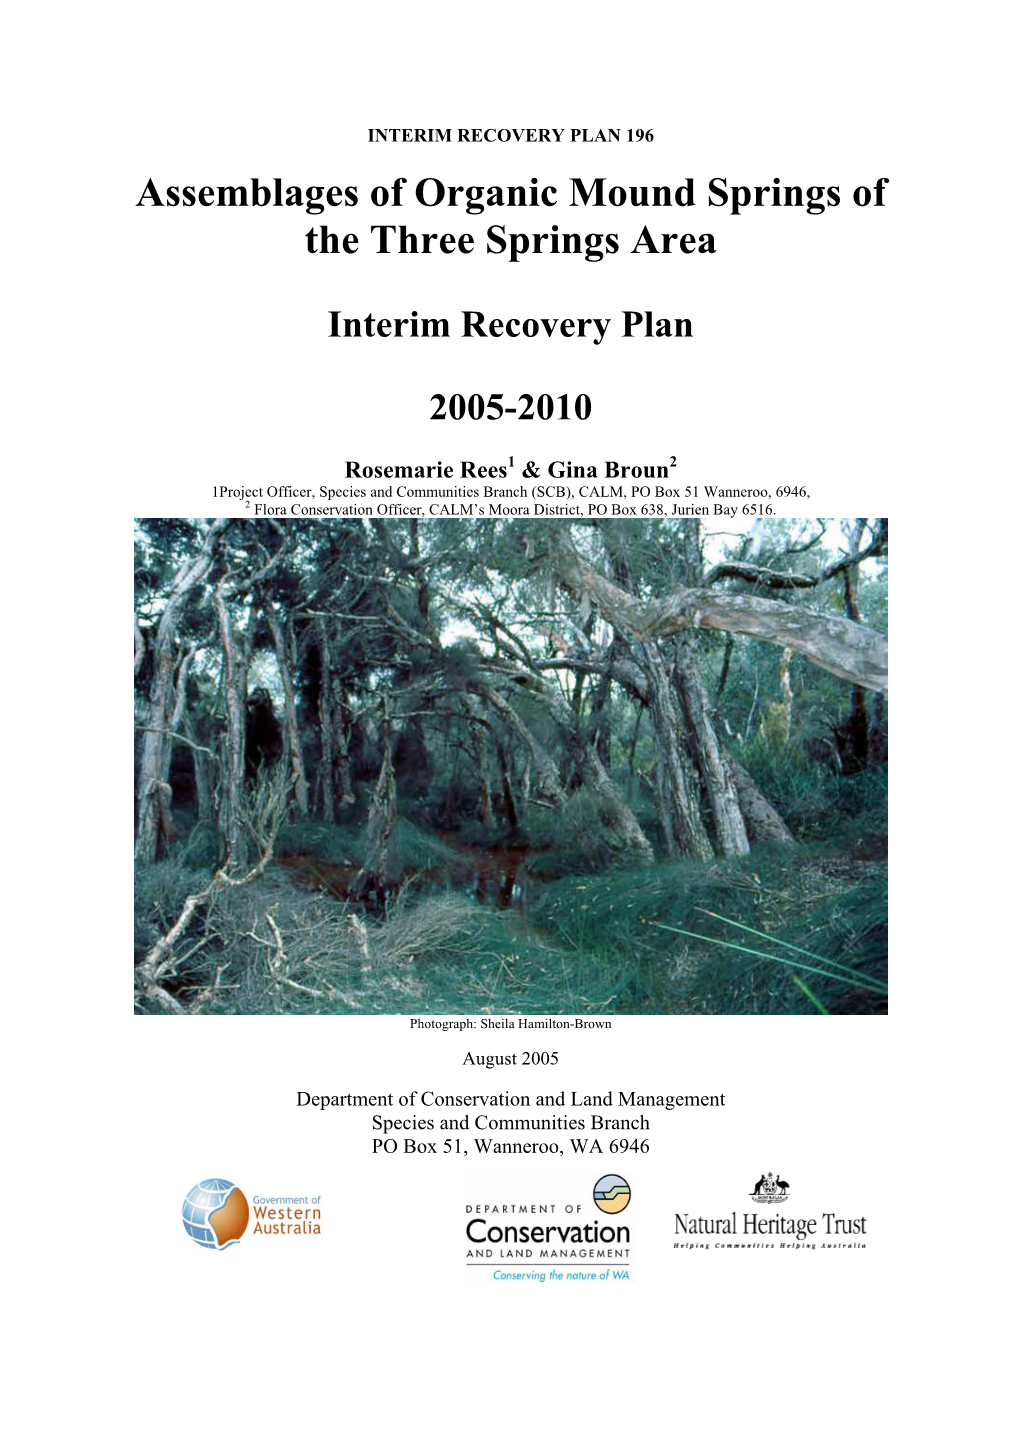 Assemblages of Organic Mound Springs of the Three Springs Area